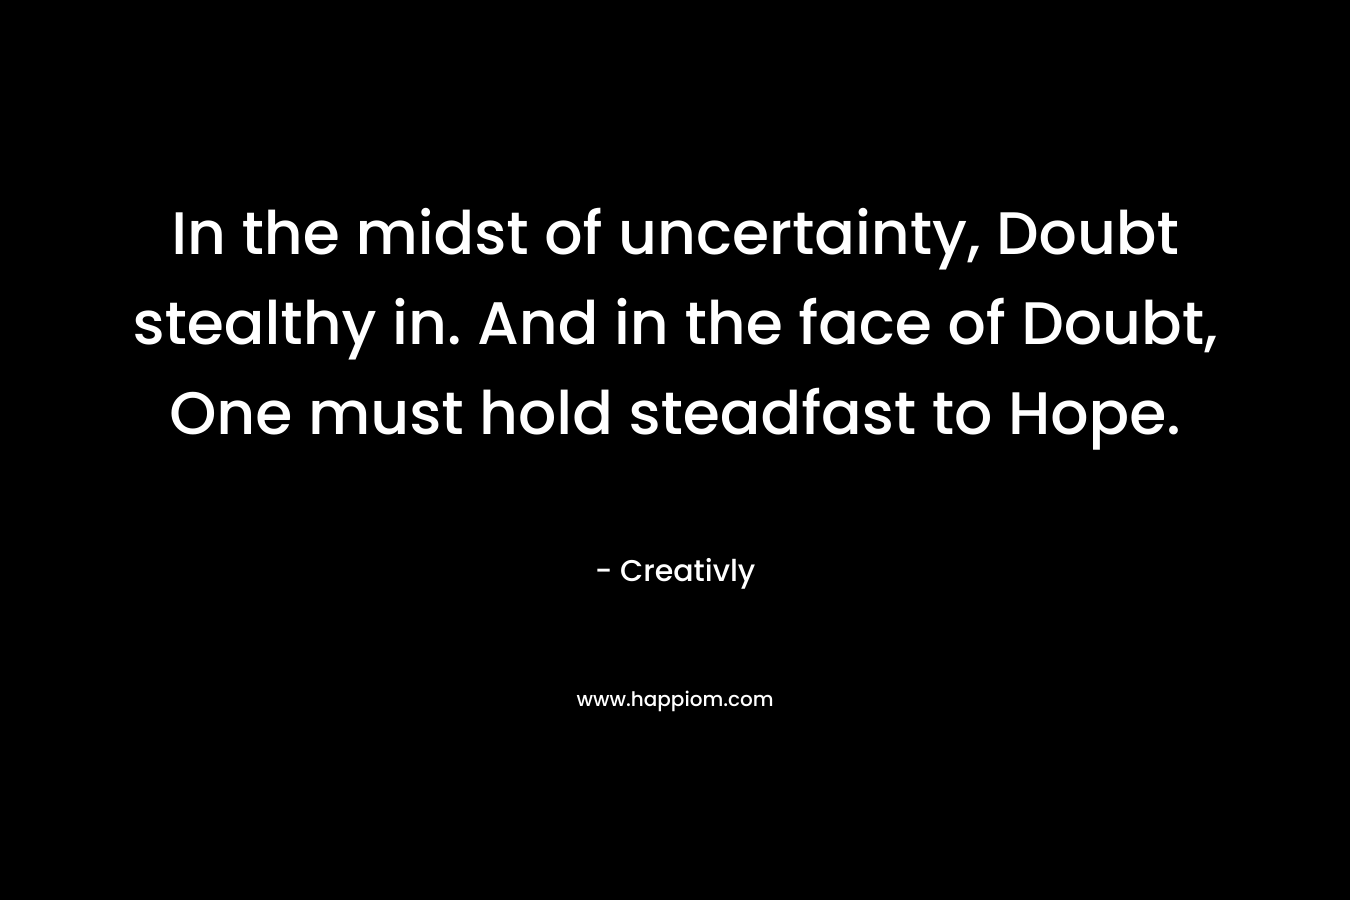 In the midst of uncertainty, Doubt stealthy in. And in the face of Doubt, One must hold steadfast to Hope.